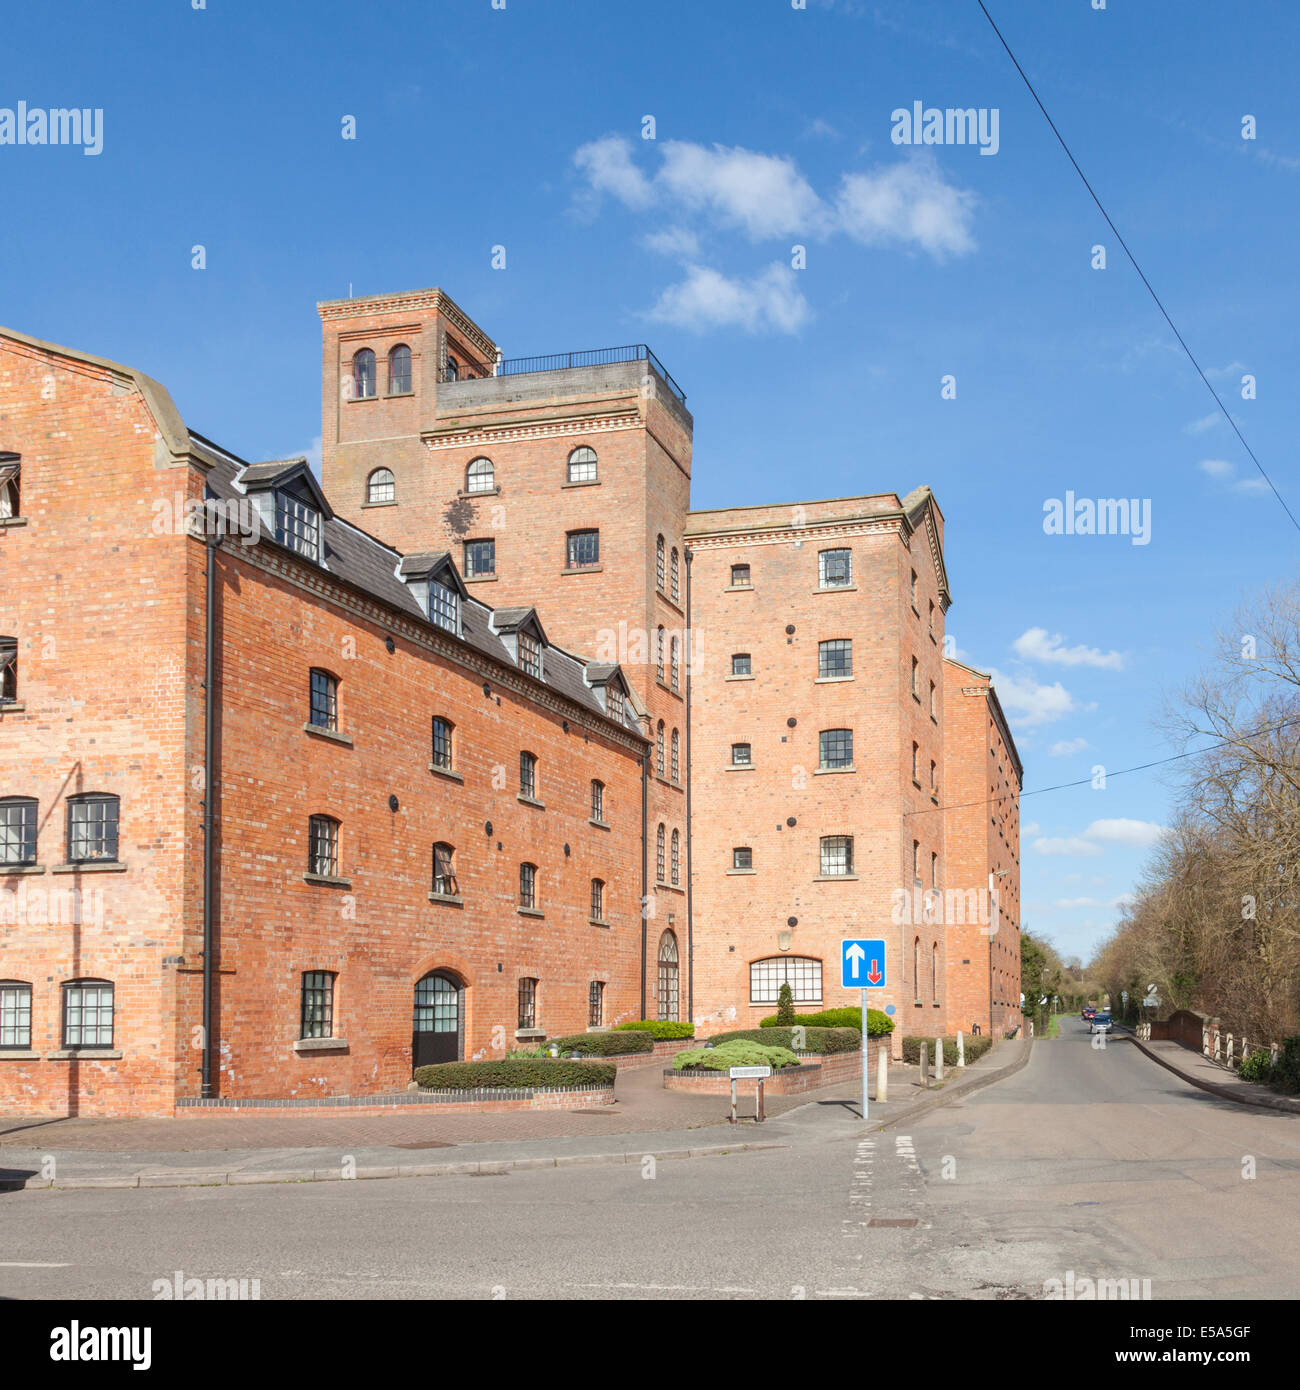 Caudwell's Mill, Southwell, Nottinghamshire, England, UK. An old flour ...